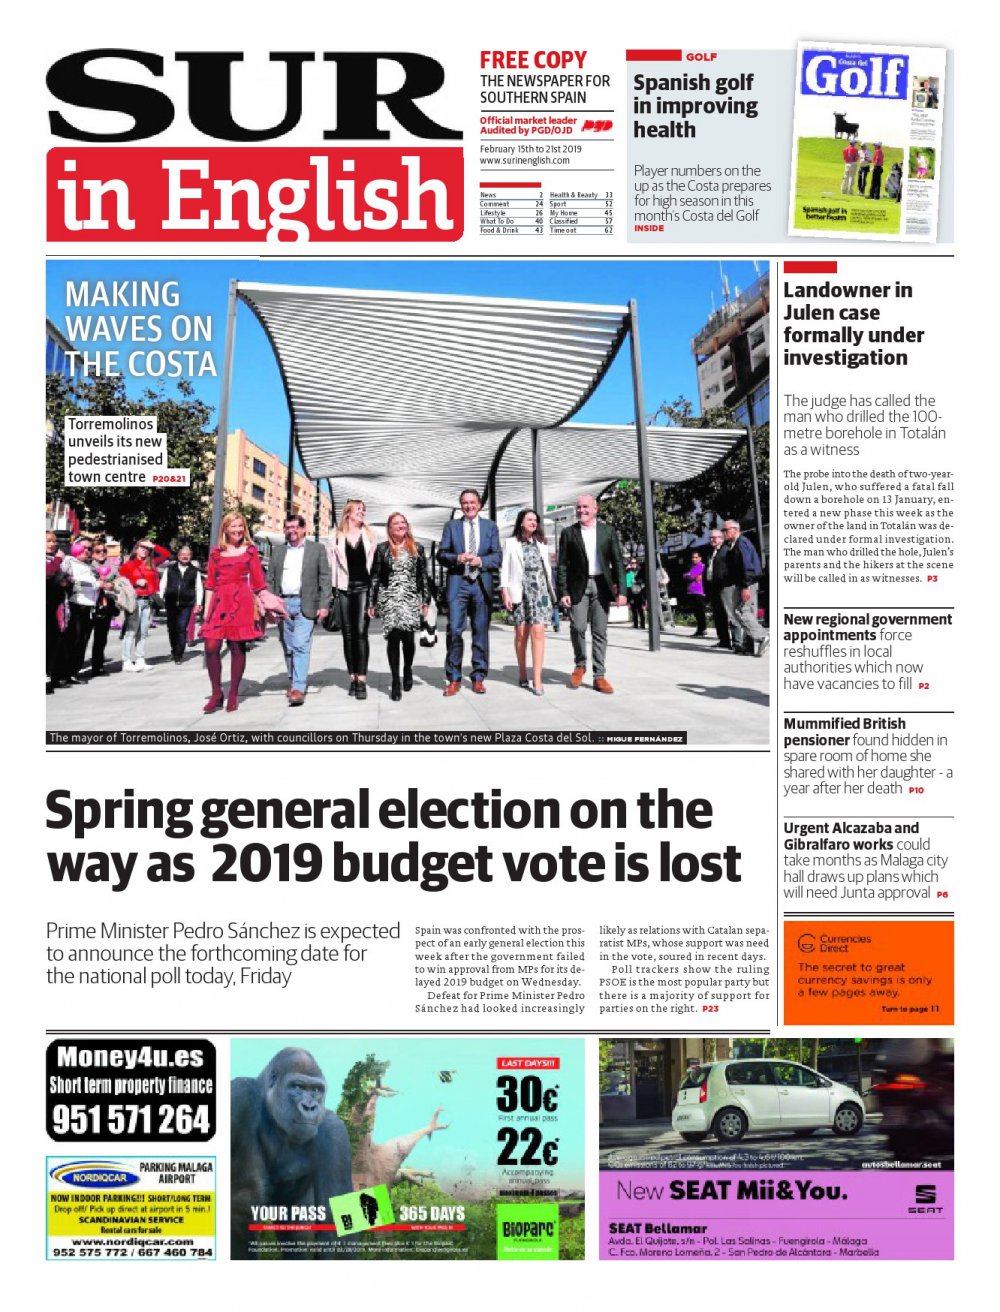 Print Edition SUR in English | February | 2019